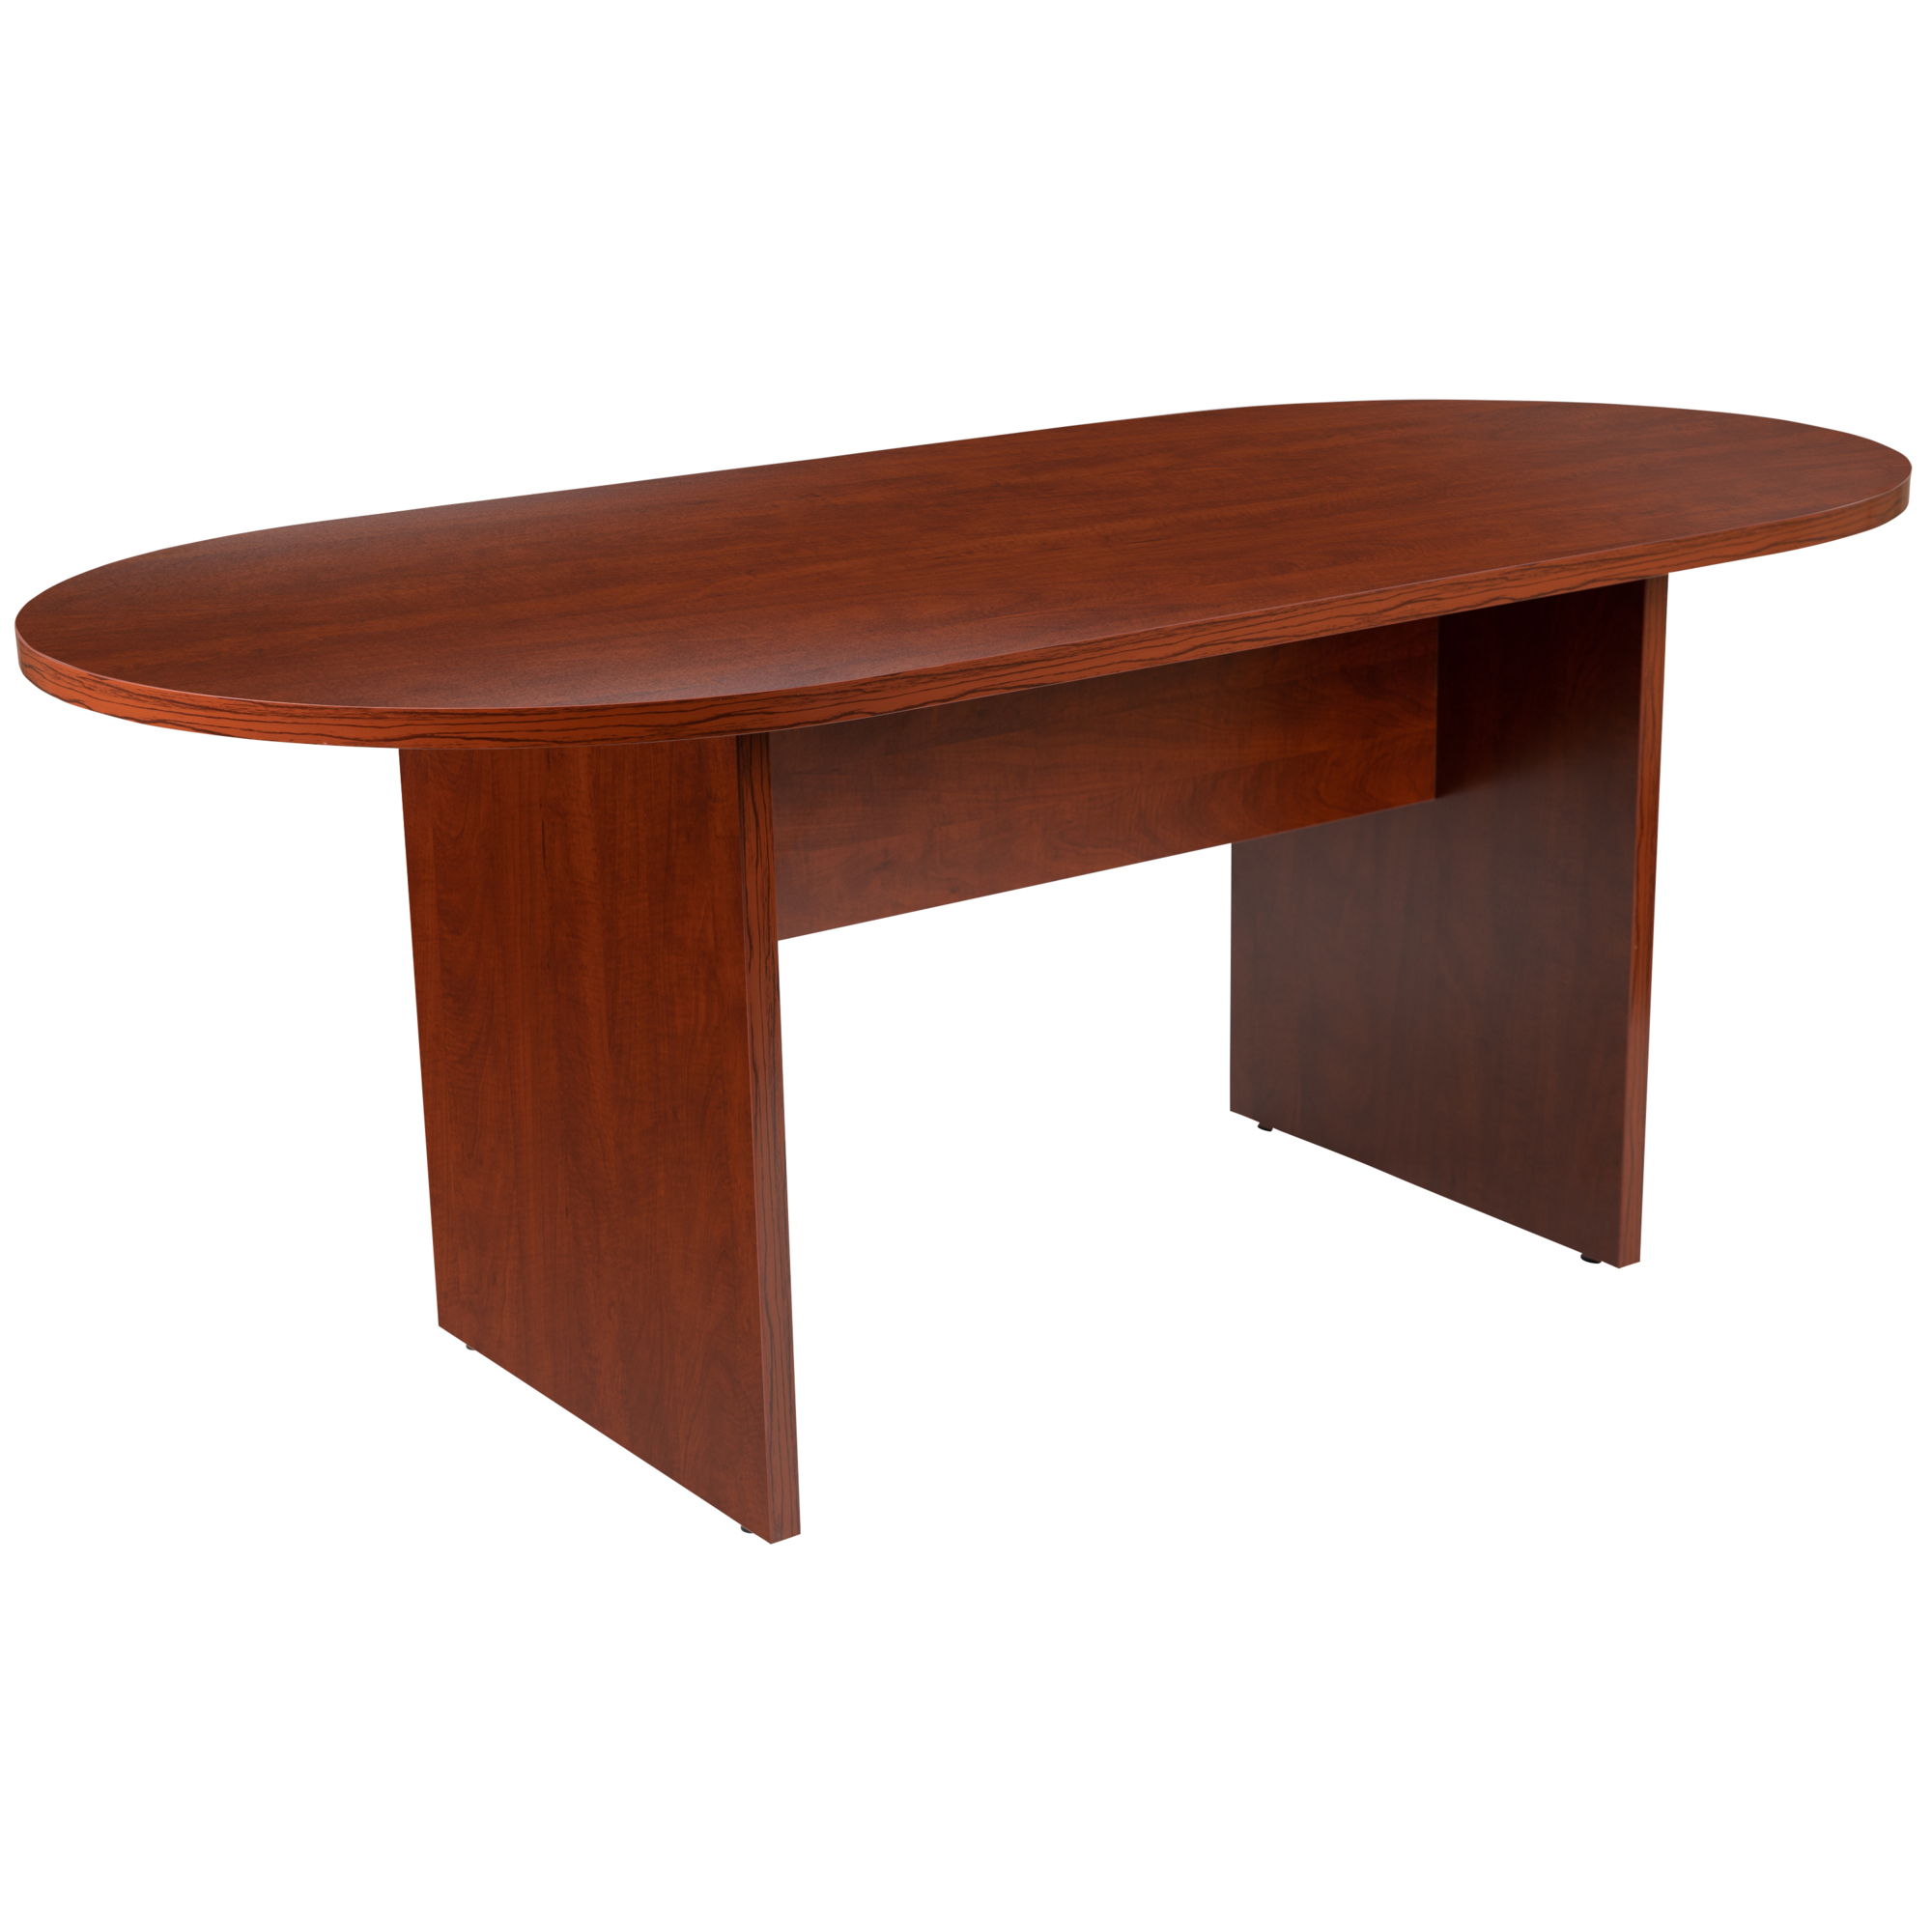 Flash Furniture, 6ft. (72Inch) Oval Conference Table in Cherry, Height 29.5 in, Width 35 in, Length 72 in, Model GCTL1035CHR